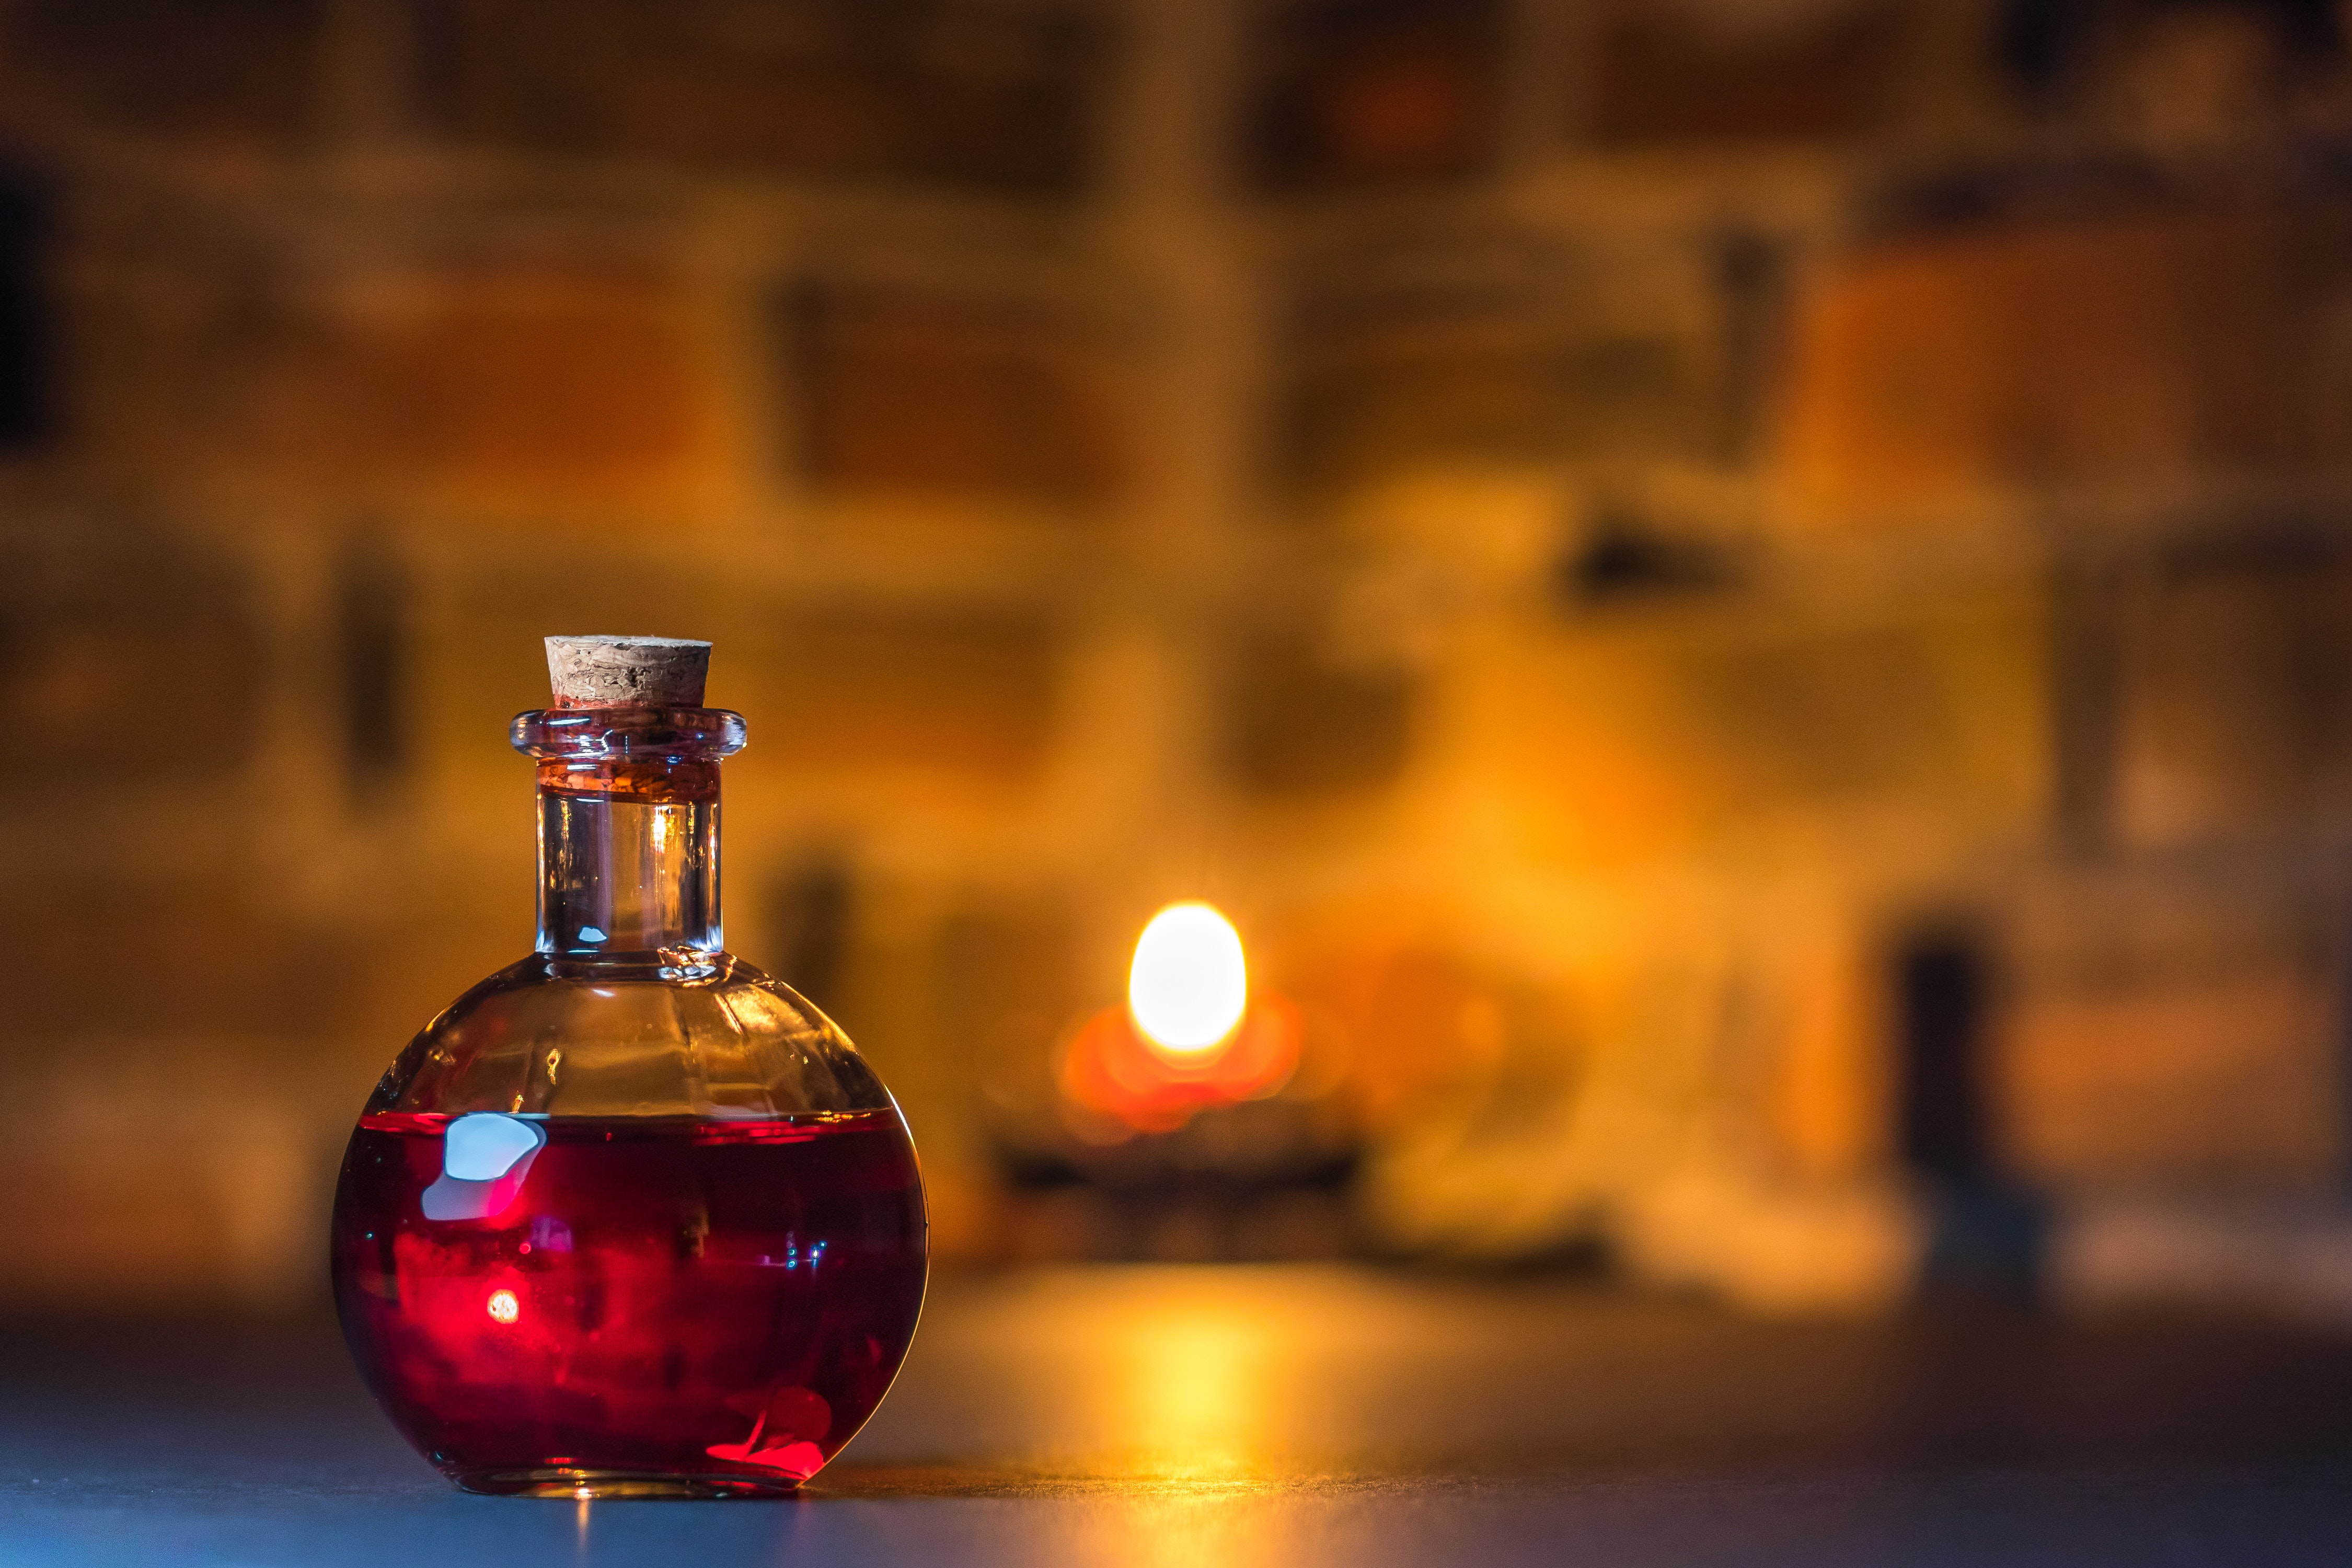 Potion photos download the best free potion stock photos hd images